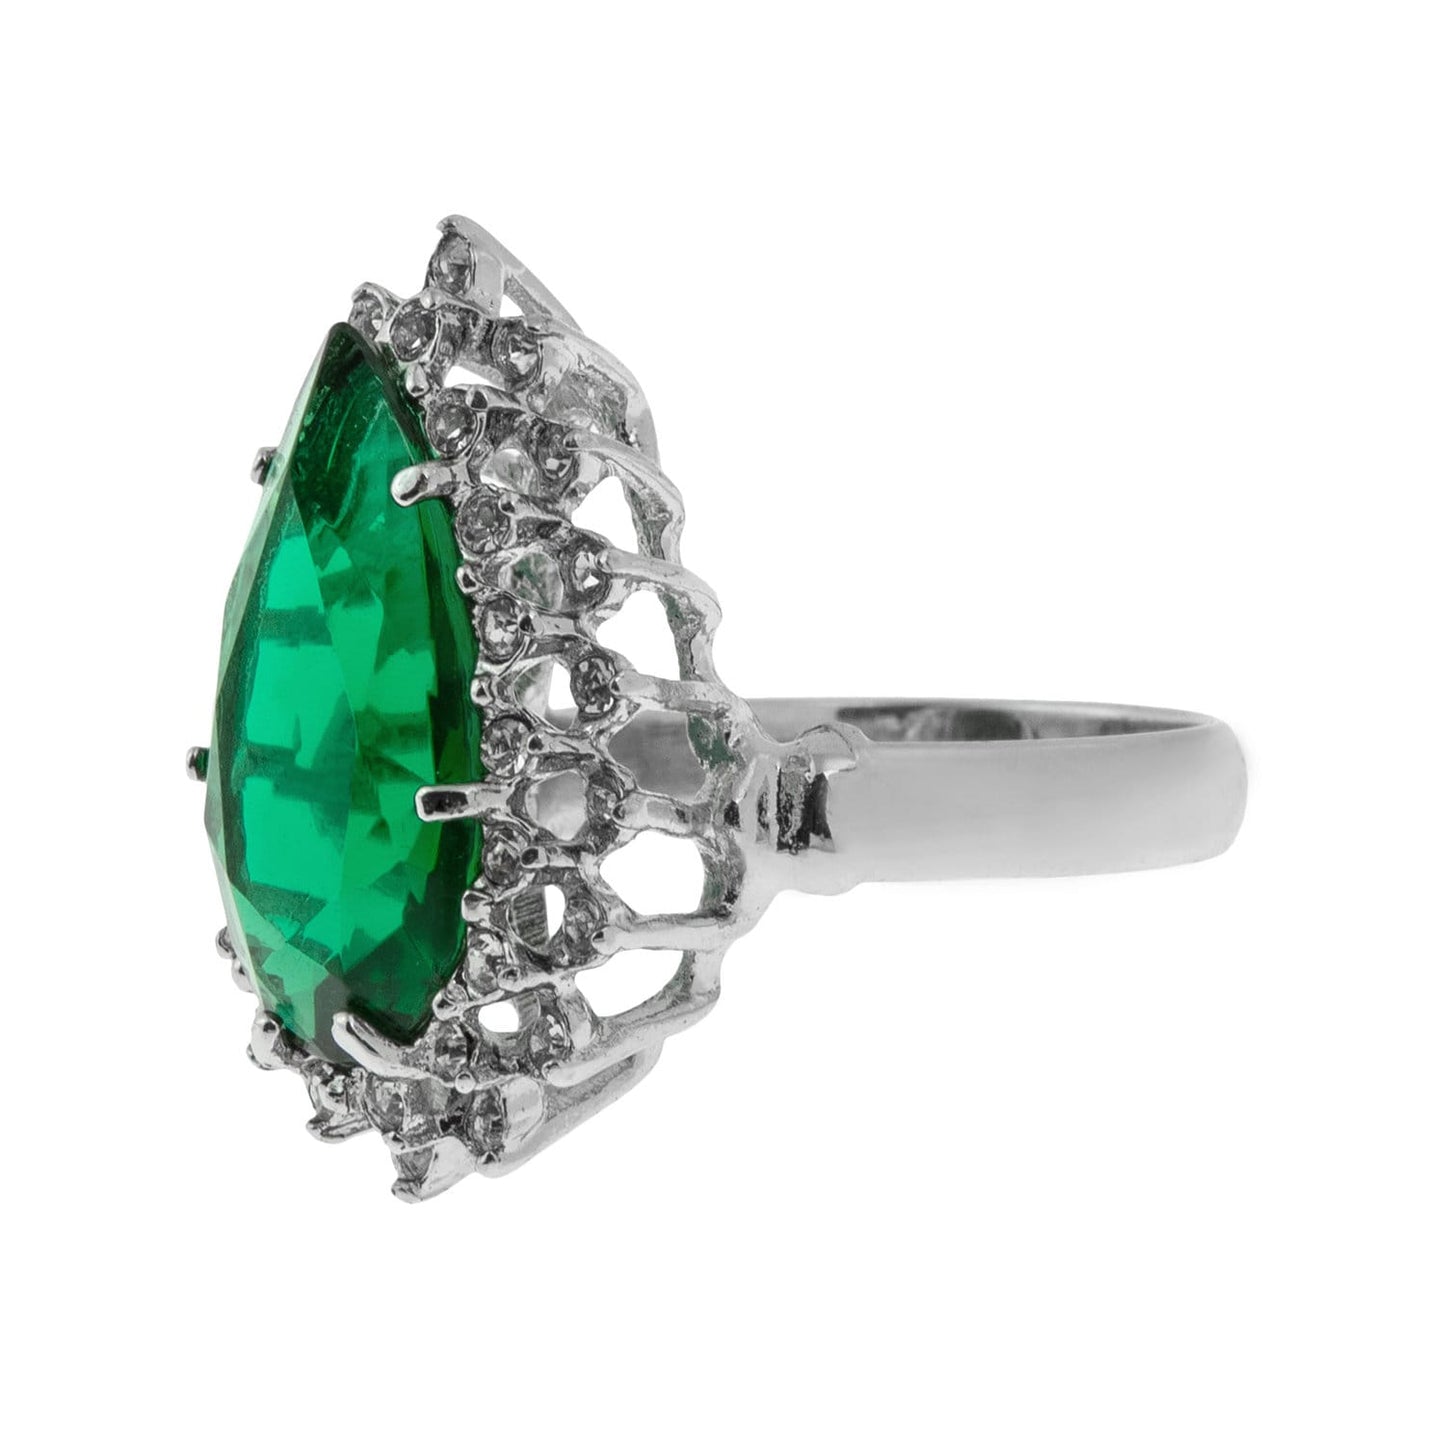 Victorian Style Ring Emerald and Clear Swarovski Crystals 18k White Gold Cocktail Ring Antique Womans #R212 - Limited Stock - Never Worn